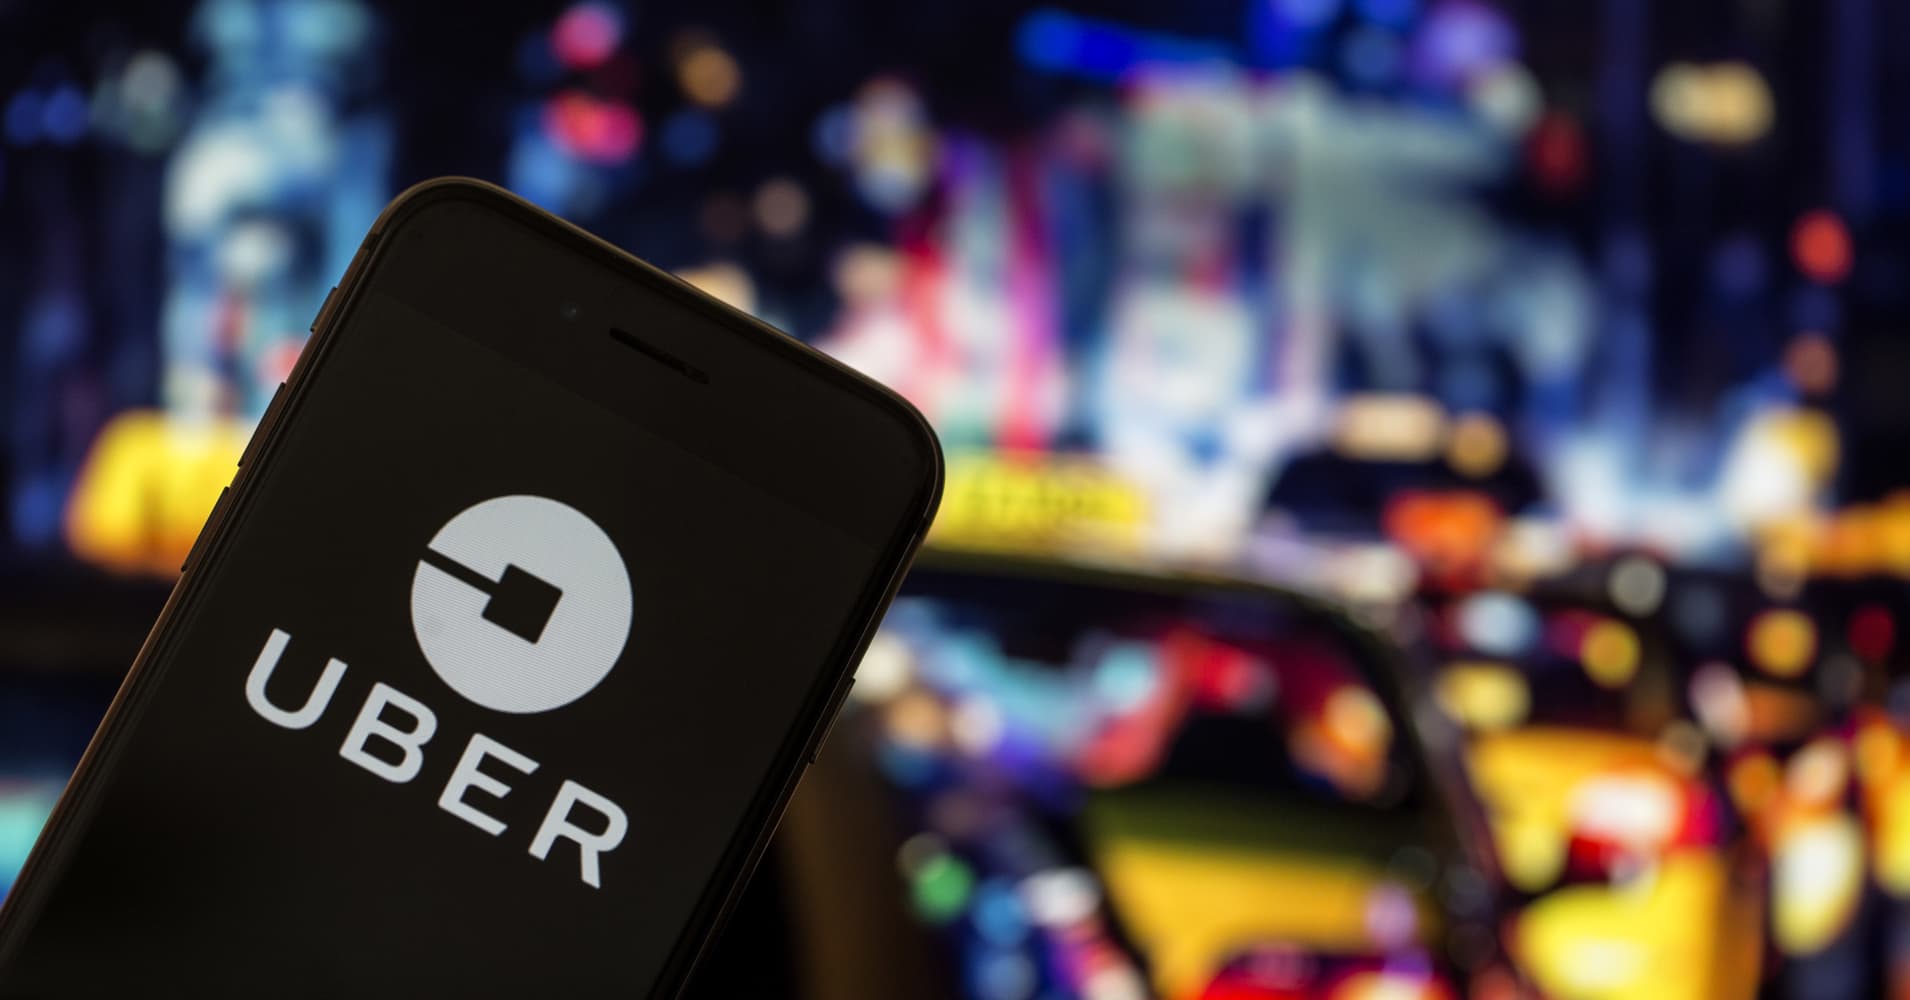 Uber files IPO paperwork, races against Lyft for big offering1910 x 1000